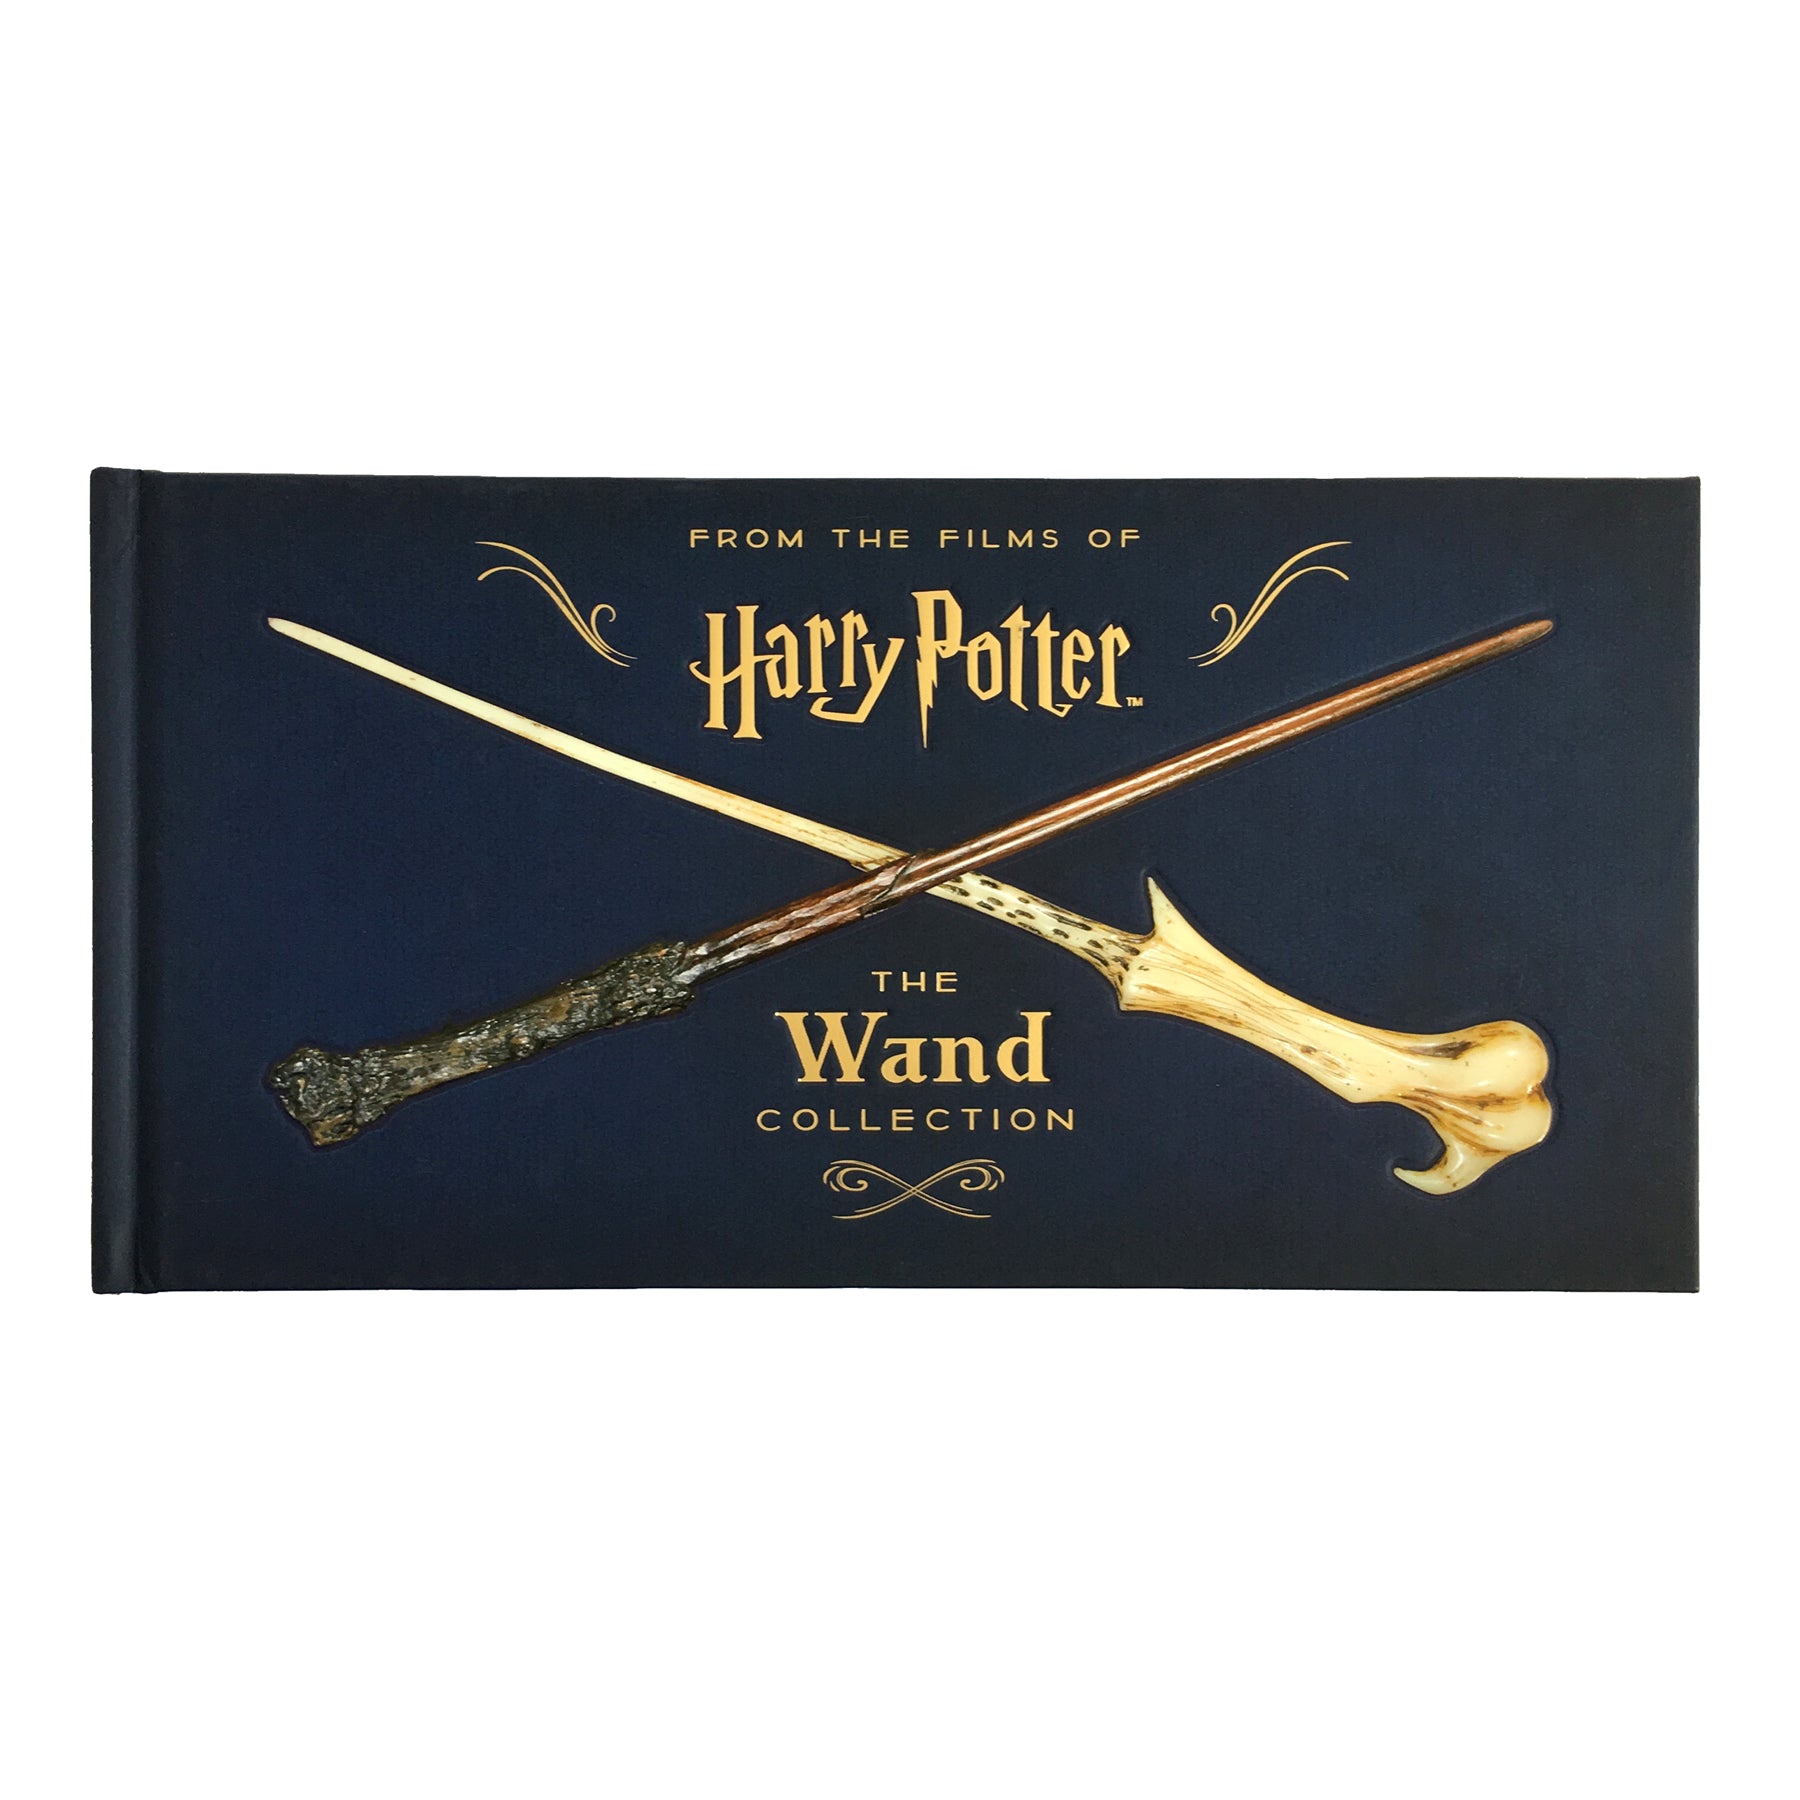 The Wand Collection Book